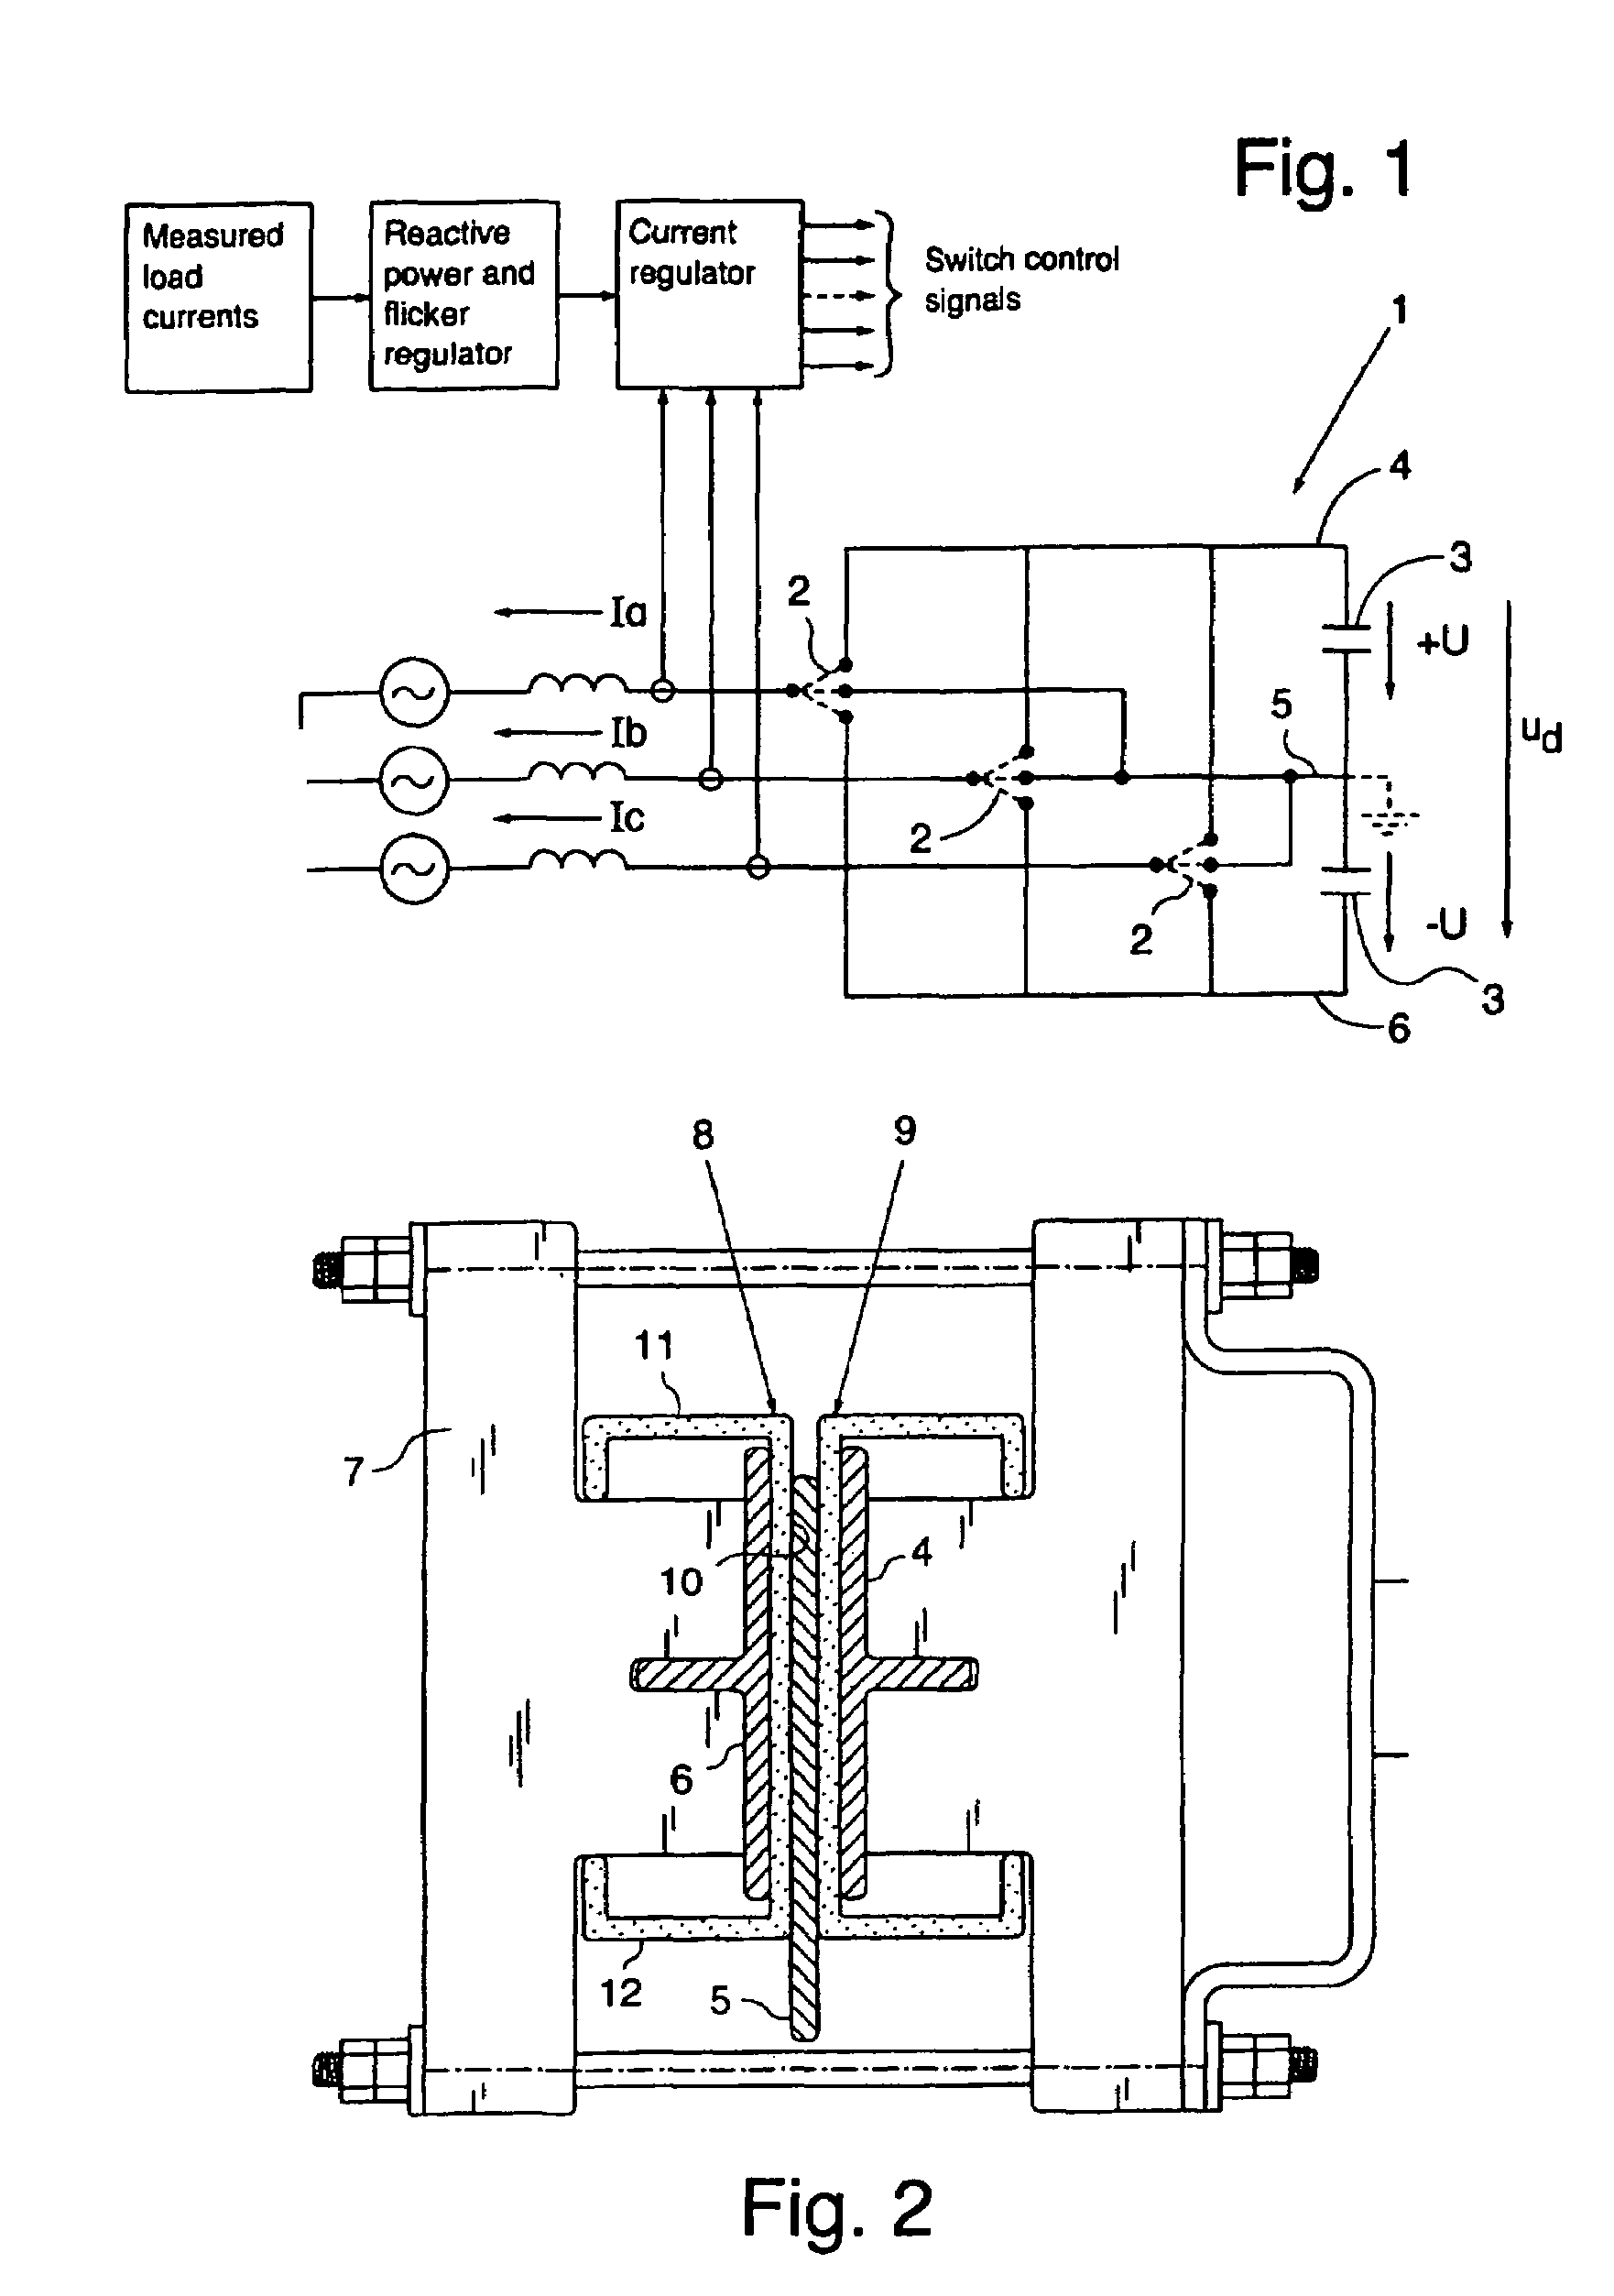 Insulated bus bar assembly in a voltage source converter